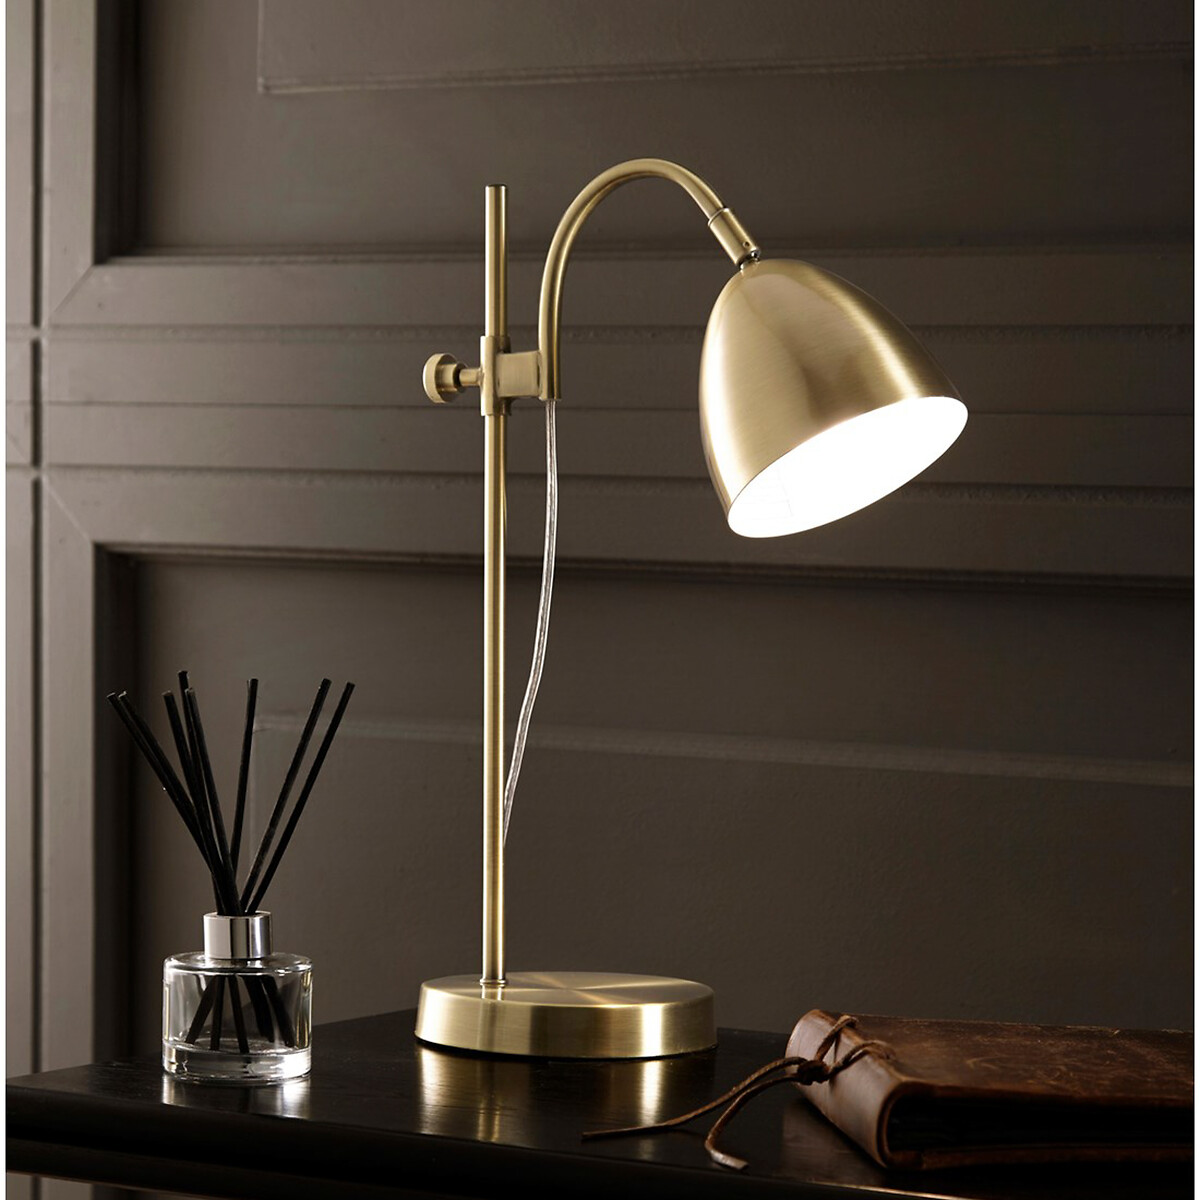 20cm Adjustable Table Lamp Aged Brass, Lamp Shade Home Hardware